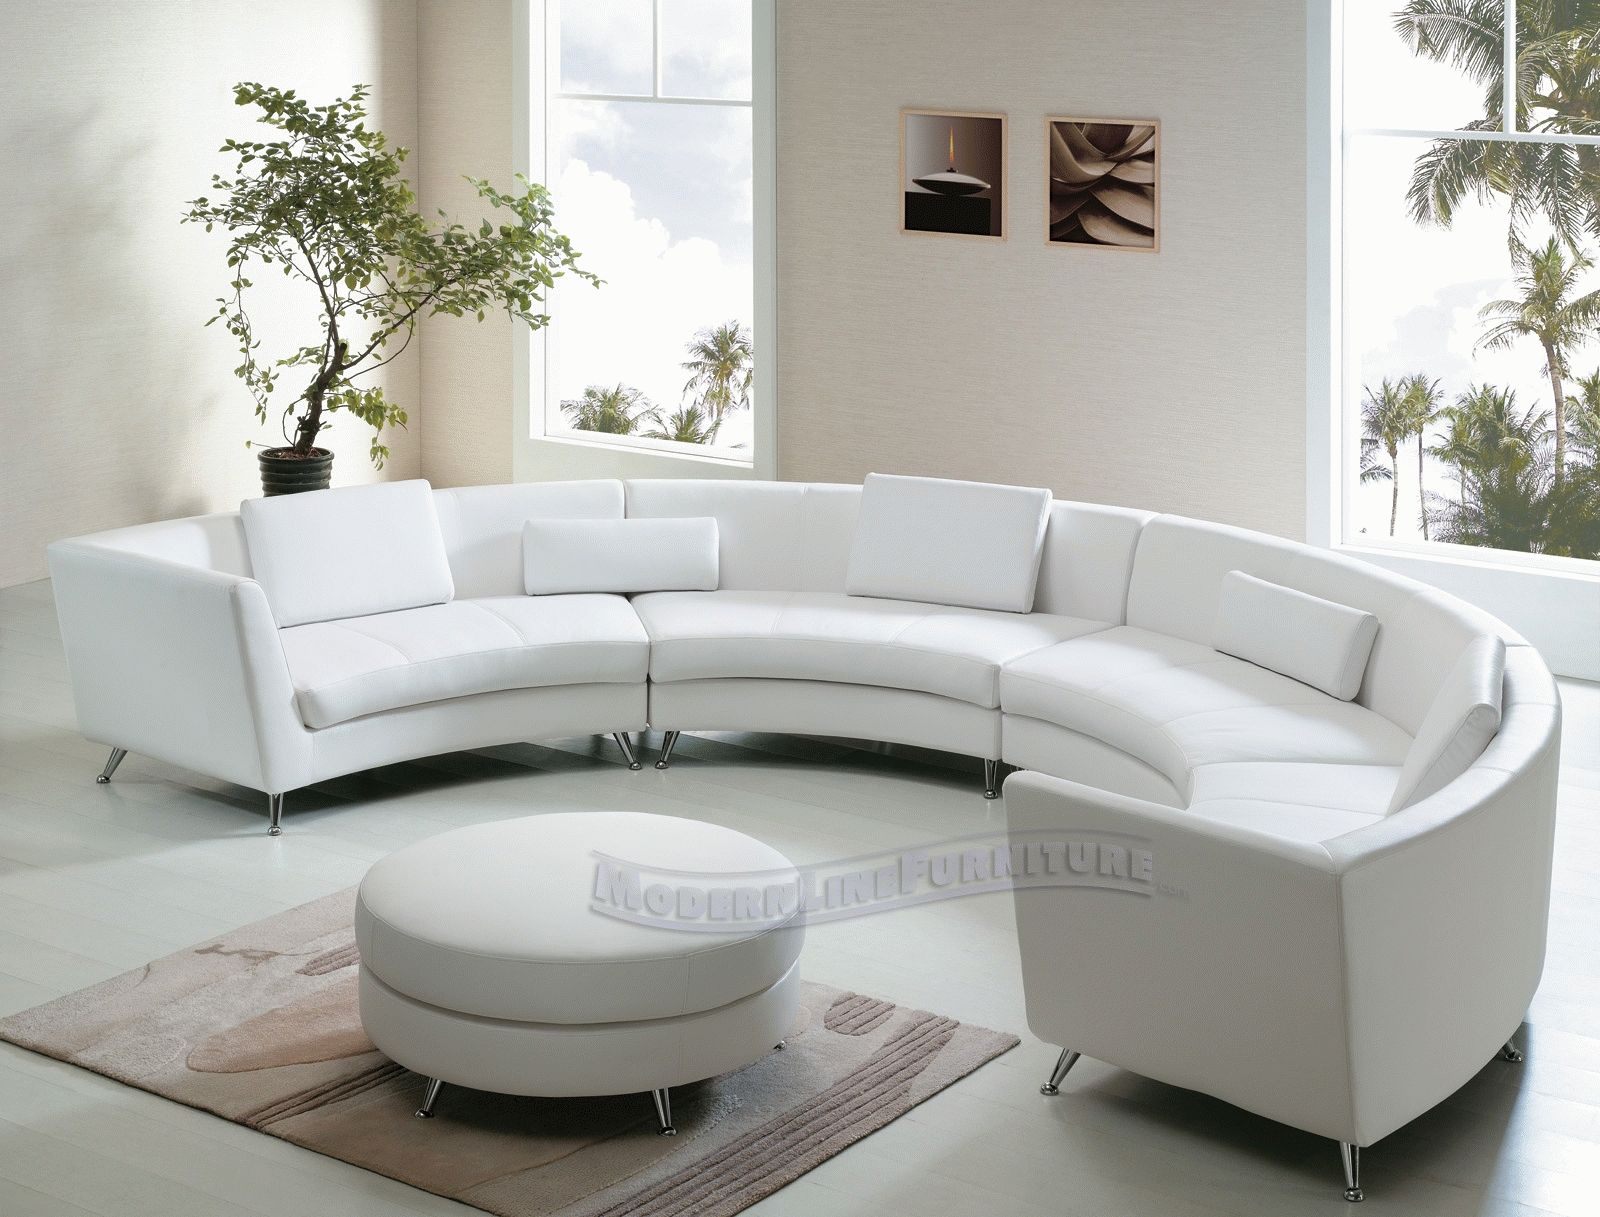 Furniture: Luxury Curved Sectional Sofa For Living Room Furniture Throughout White Sectional Sofa For Sale (View 30 of 30)